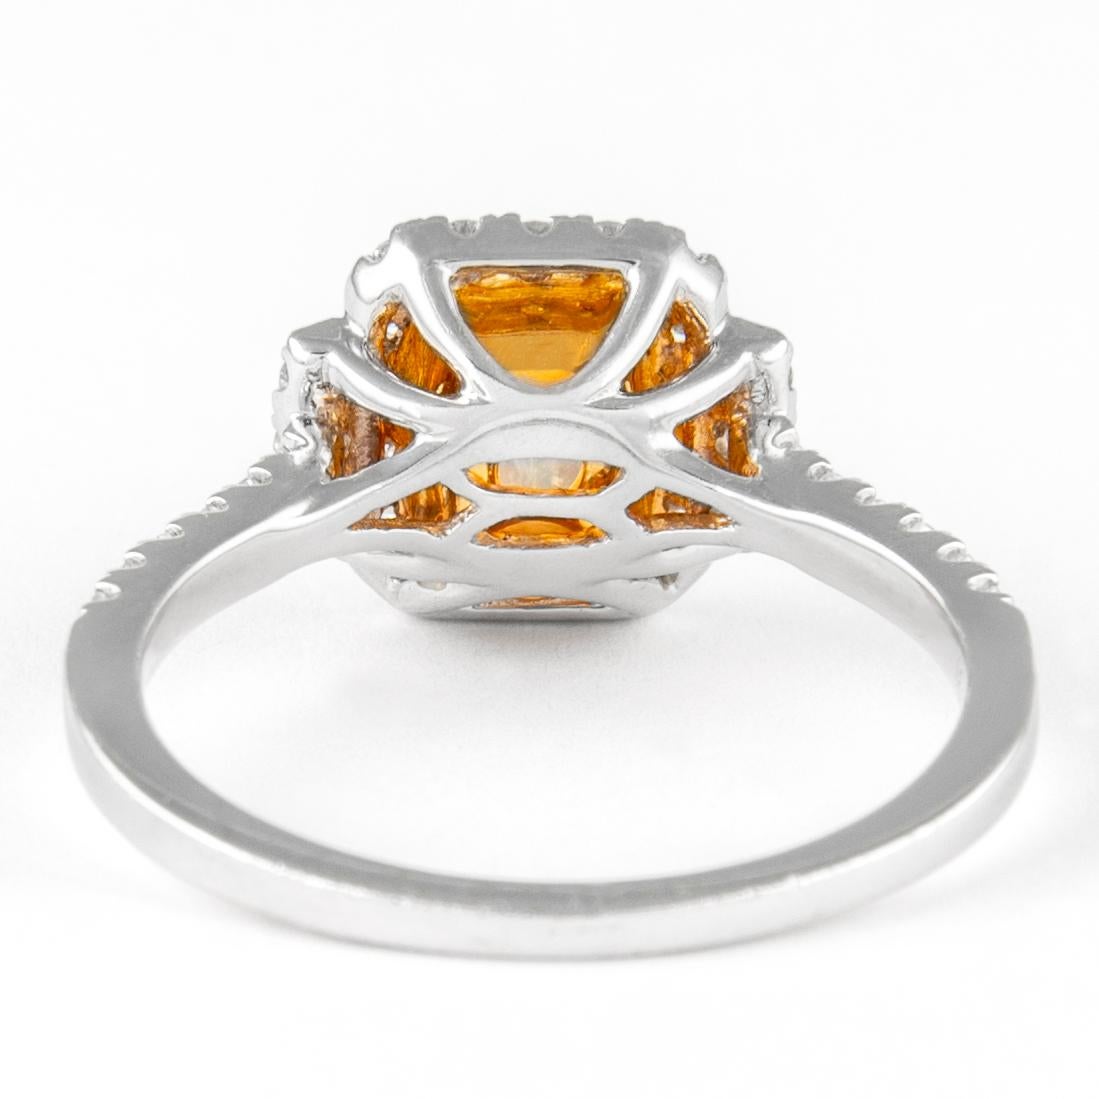 Alexander 1.42ctt Fancy Yellow Cushion Diamond with Halo Ring 18k Two Tone In New Condition For Sale In BEVERLY HILLS, CA